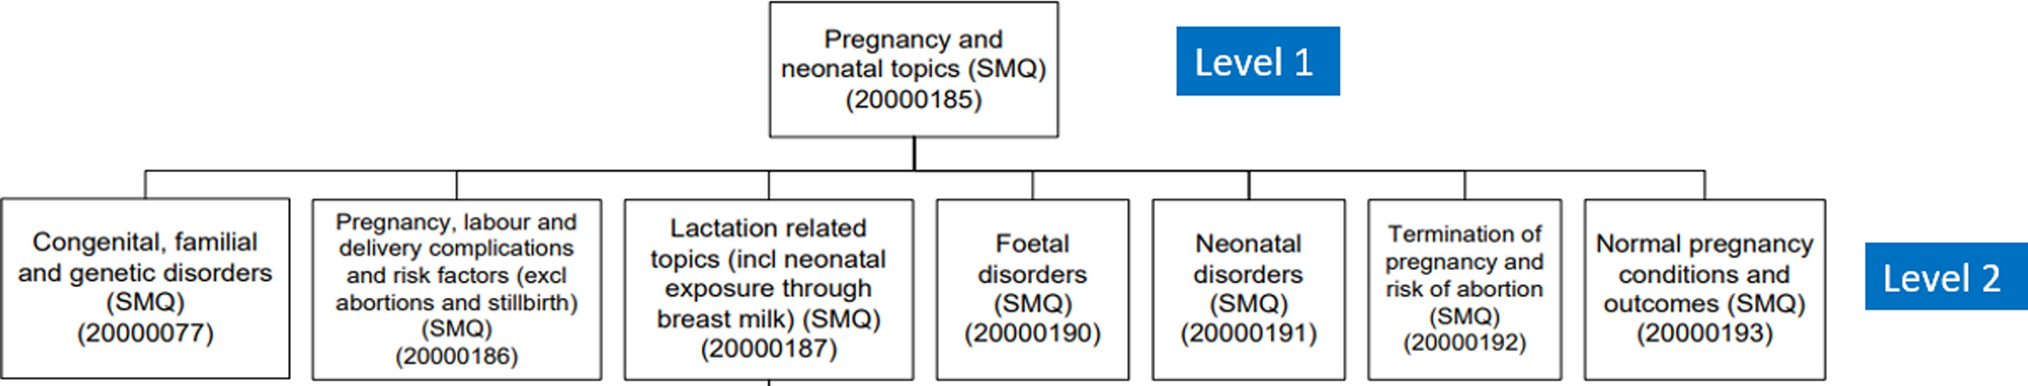 Identification of Pregnancy Adverse Drug Reactions in Pharmacovigilance Reporting Systems: A Novel Algorithm Developed in EudraVigilance